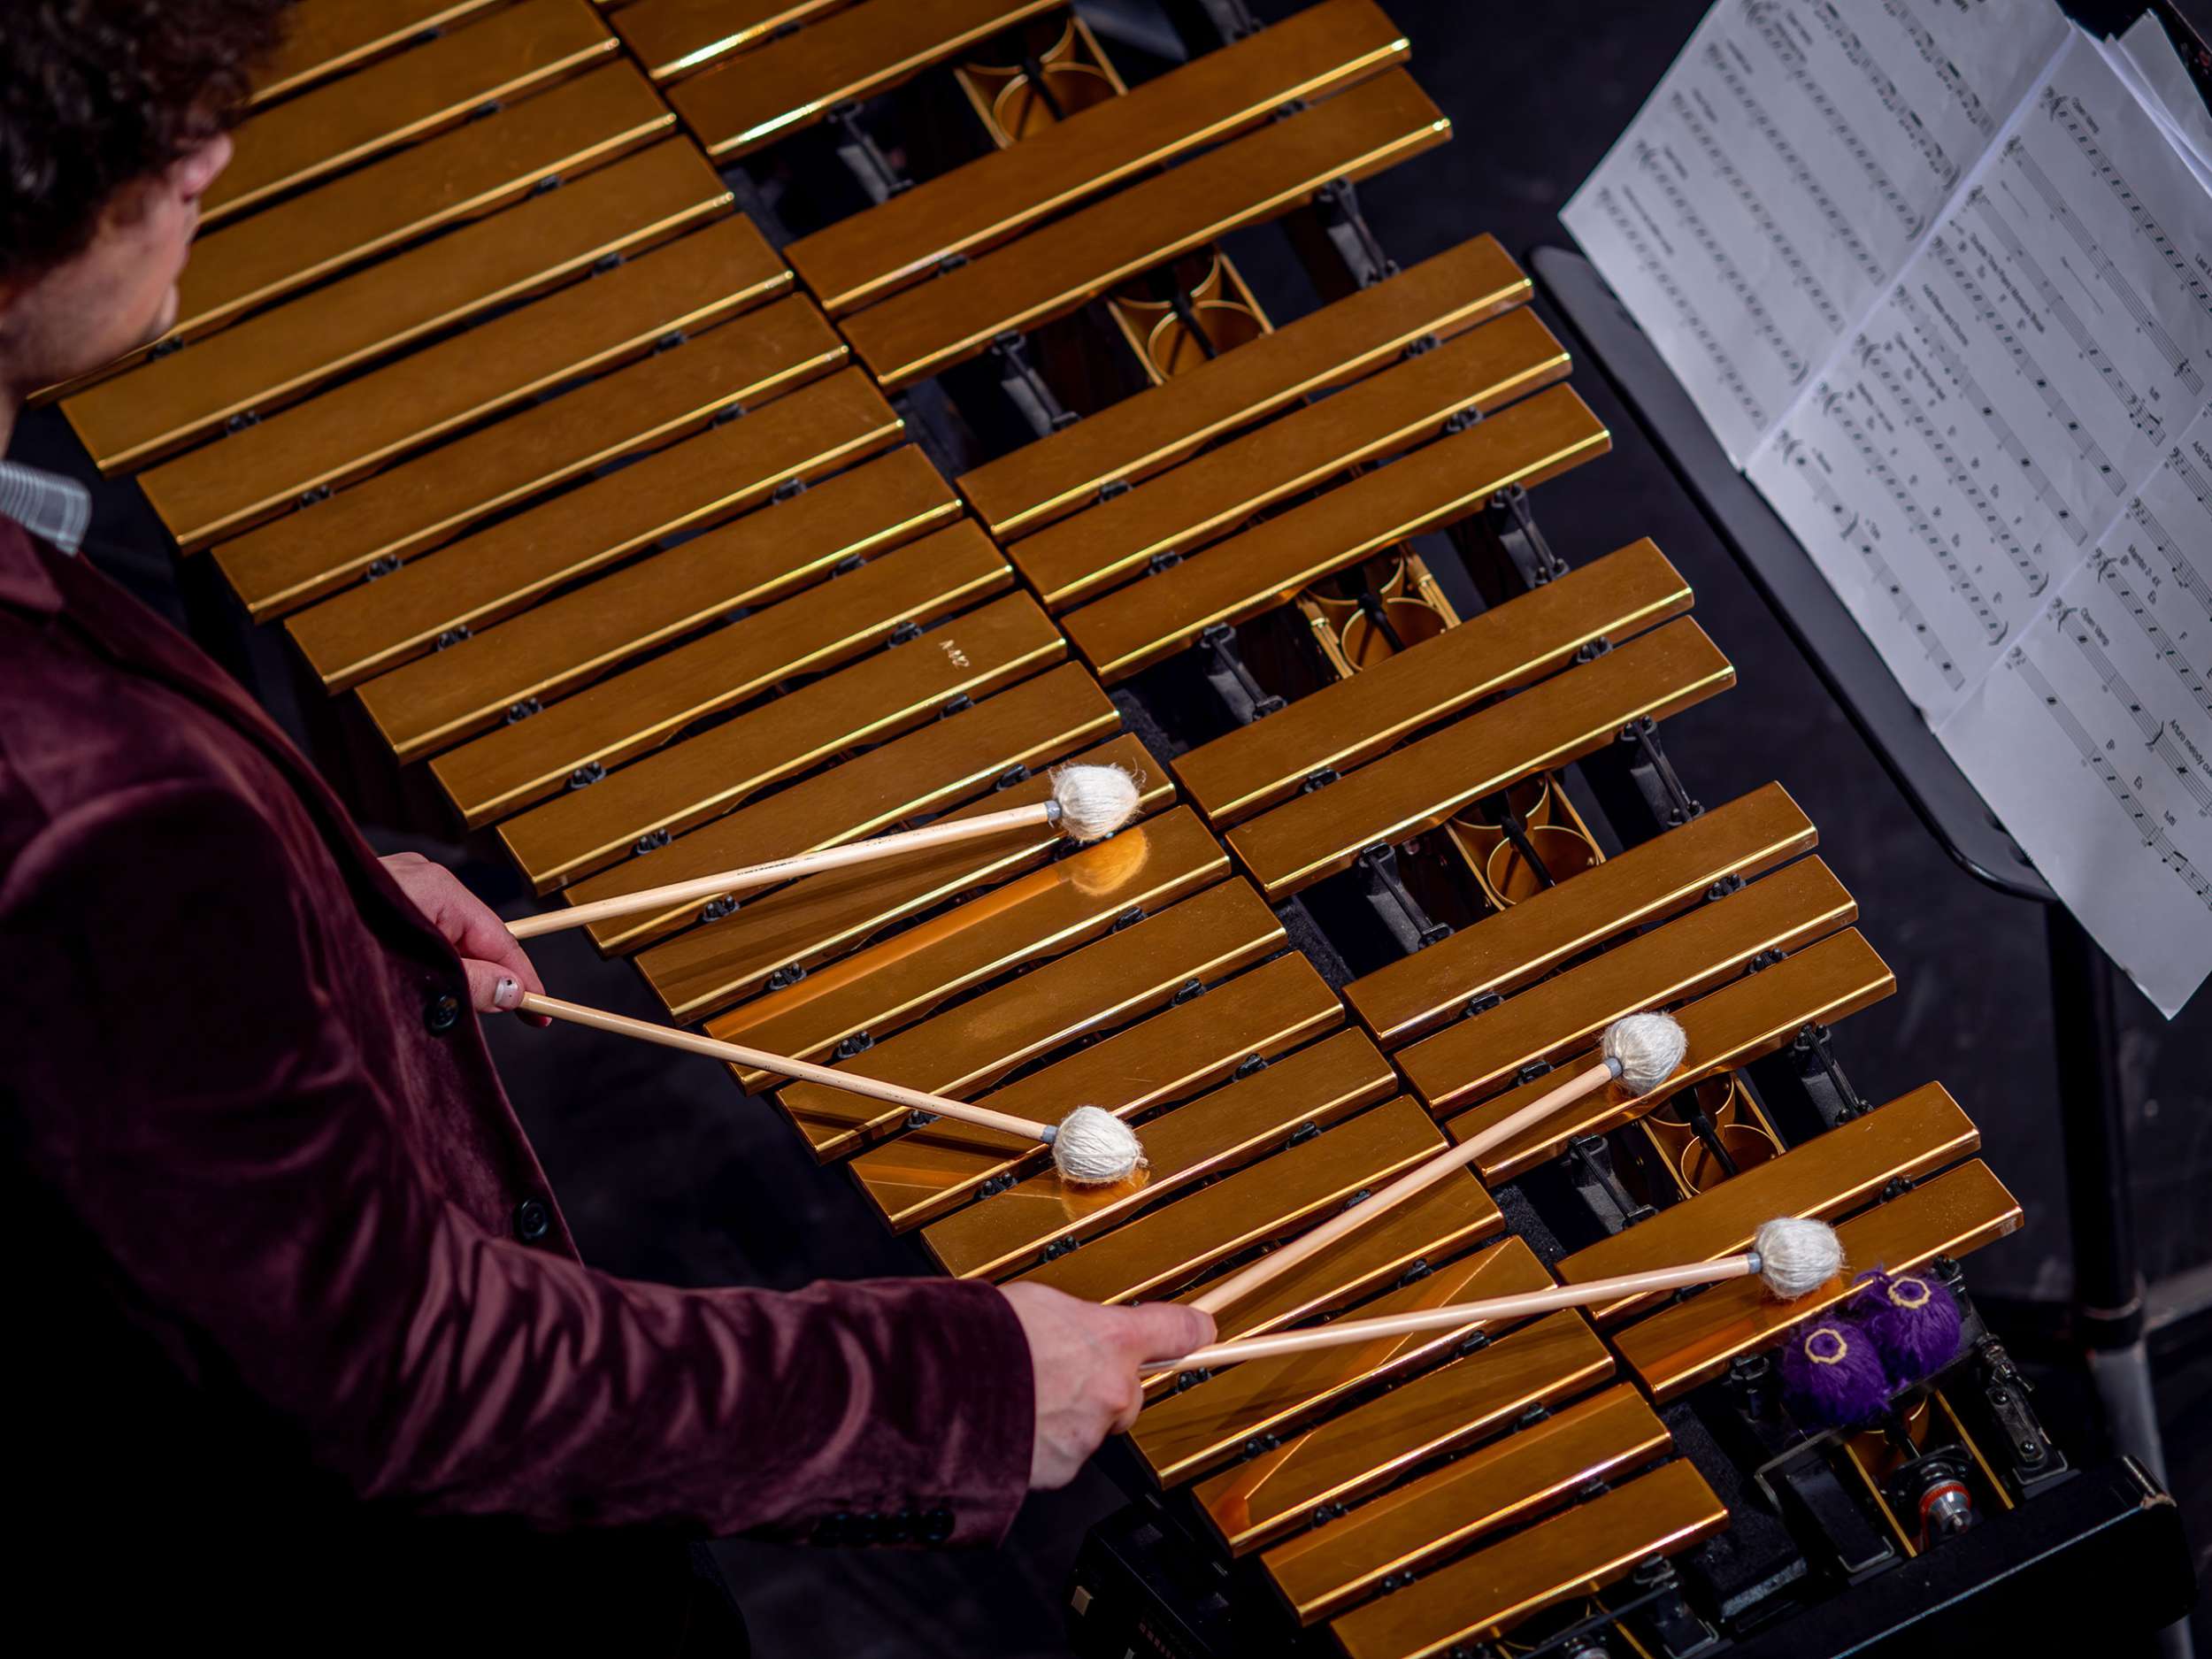 A student in a maroon jacket plays a brass vibraphone with mallets.